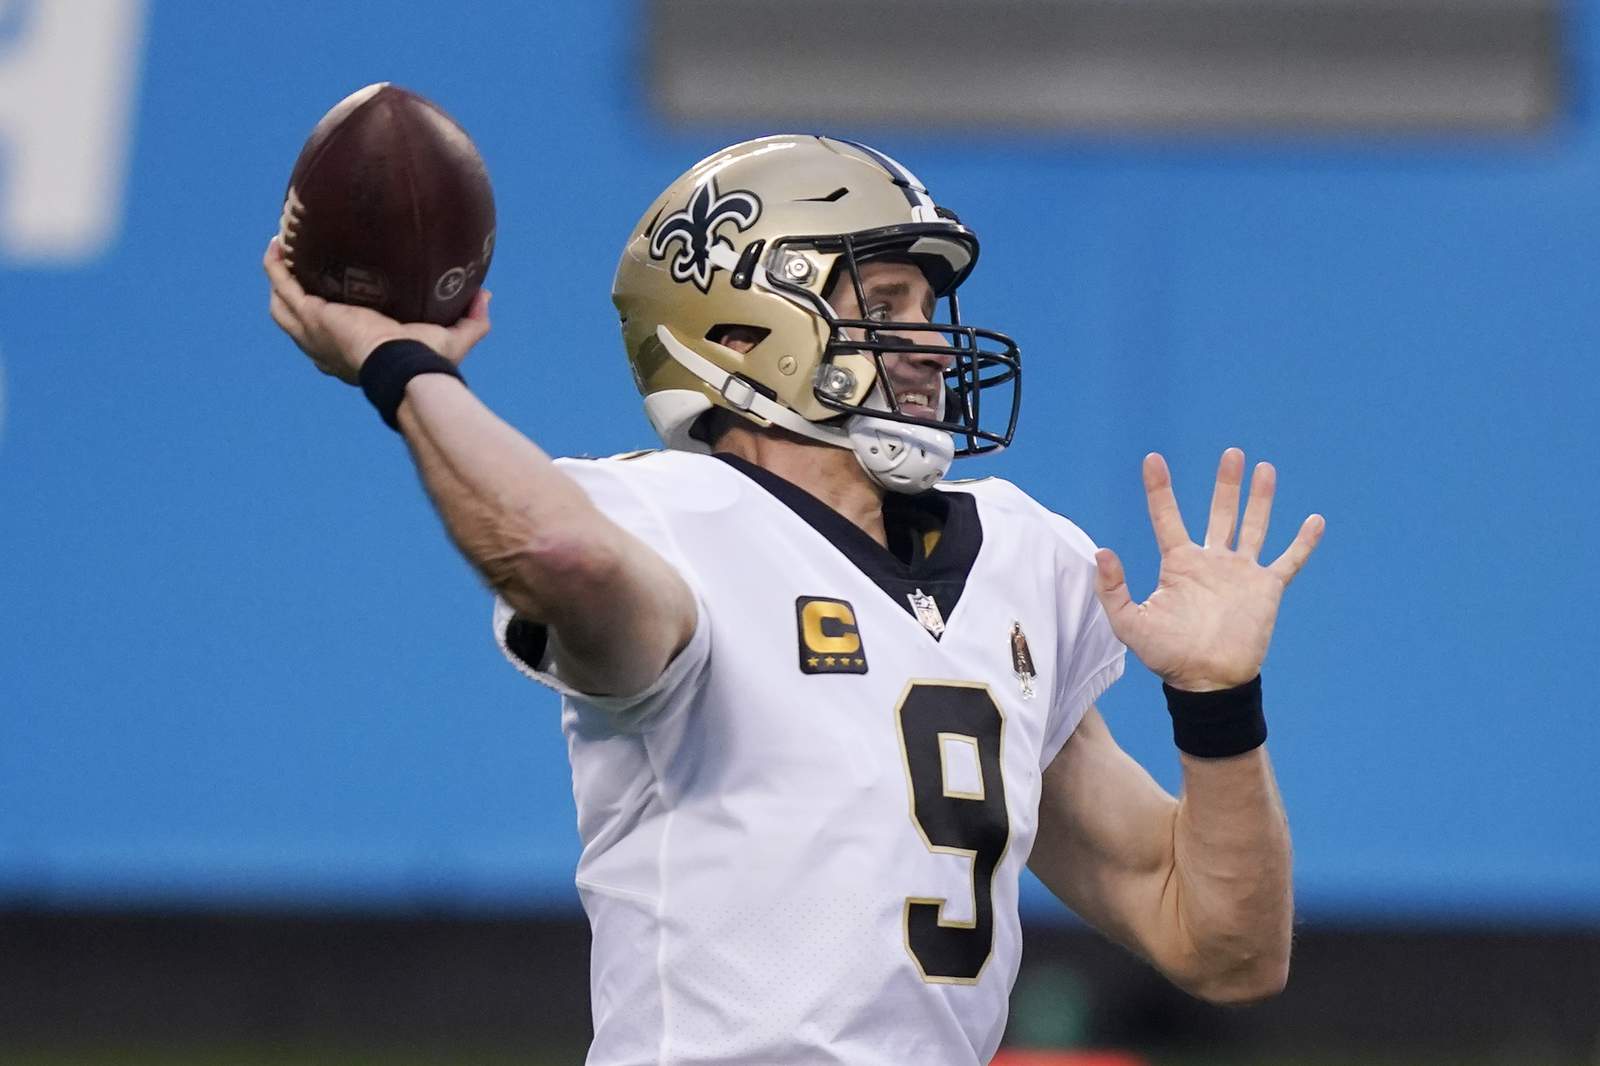 Saints rout Panthers 33-7 to earn No. 2 seed in NFC playoffs